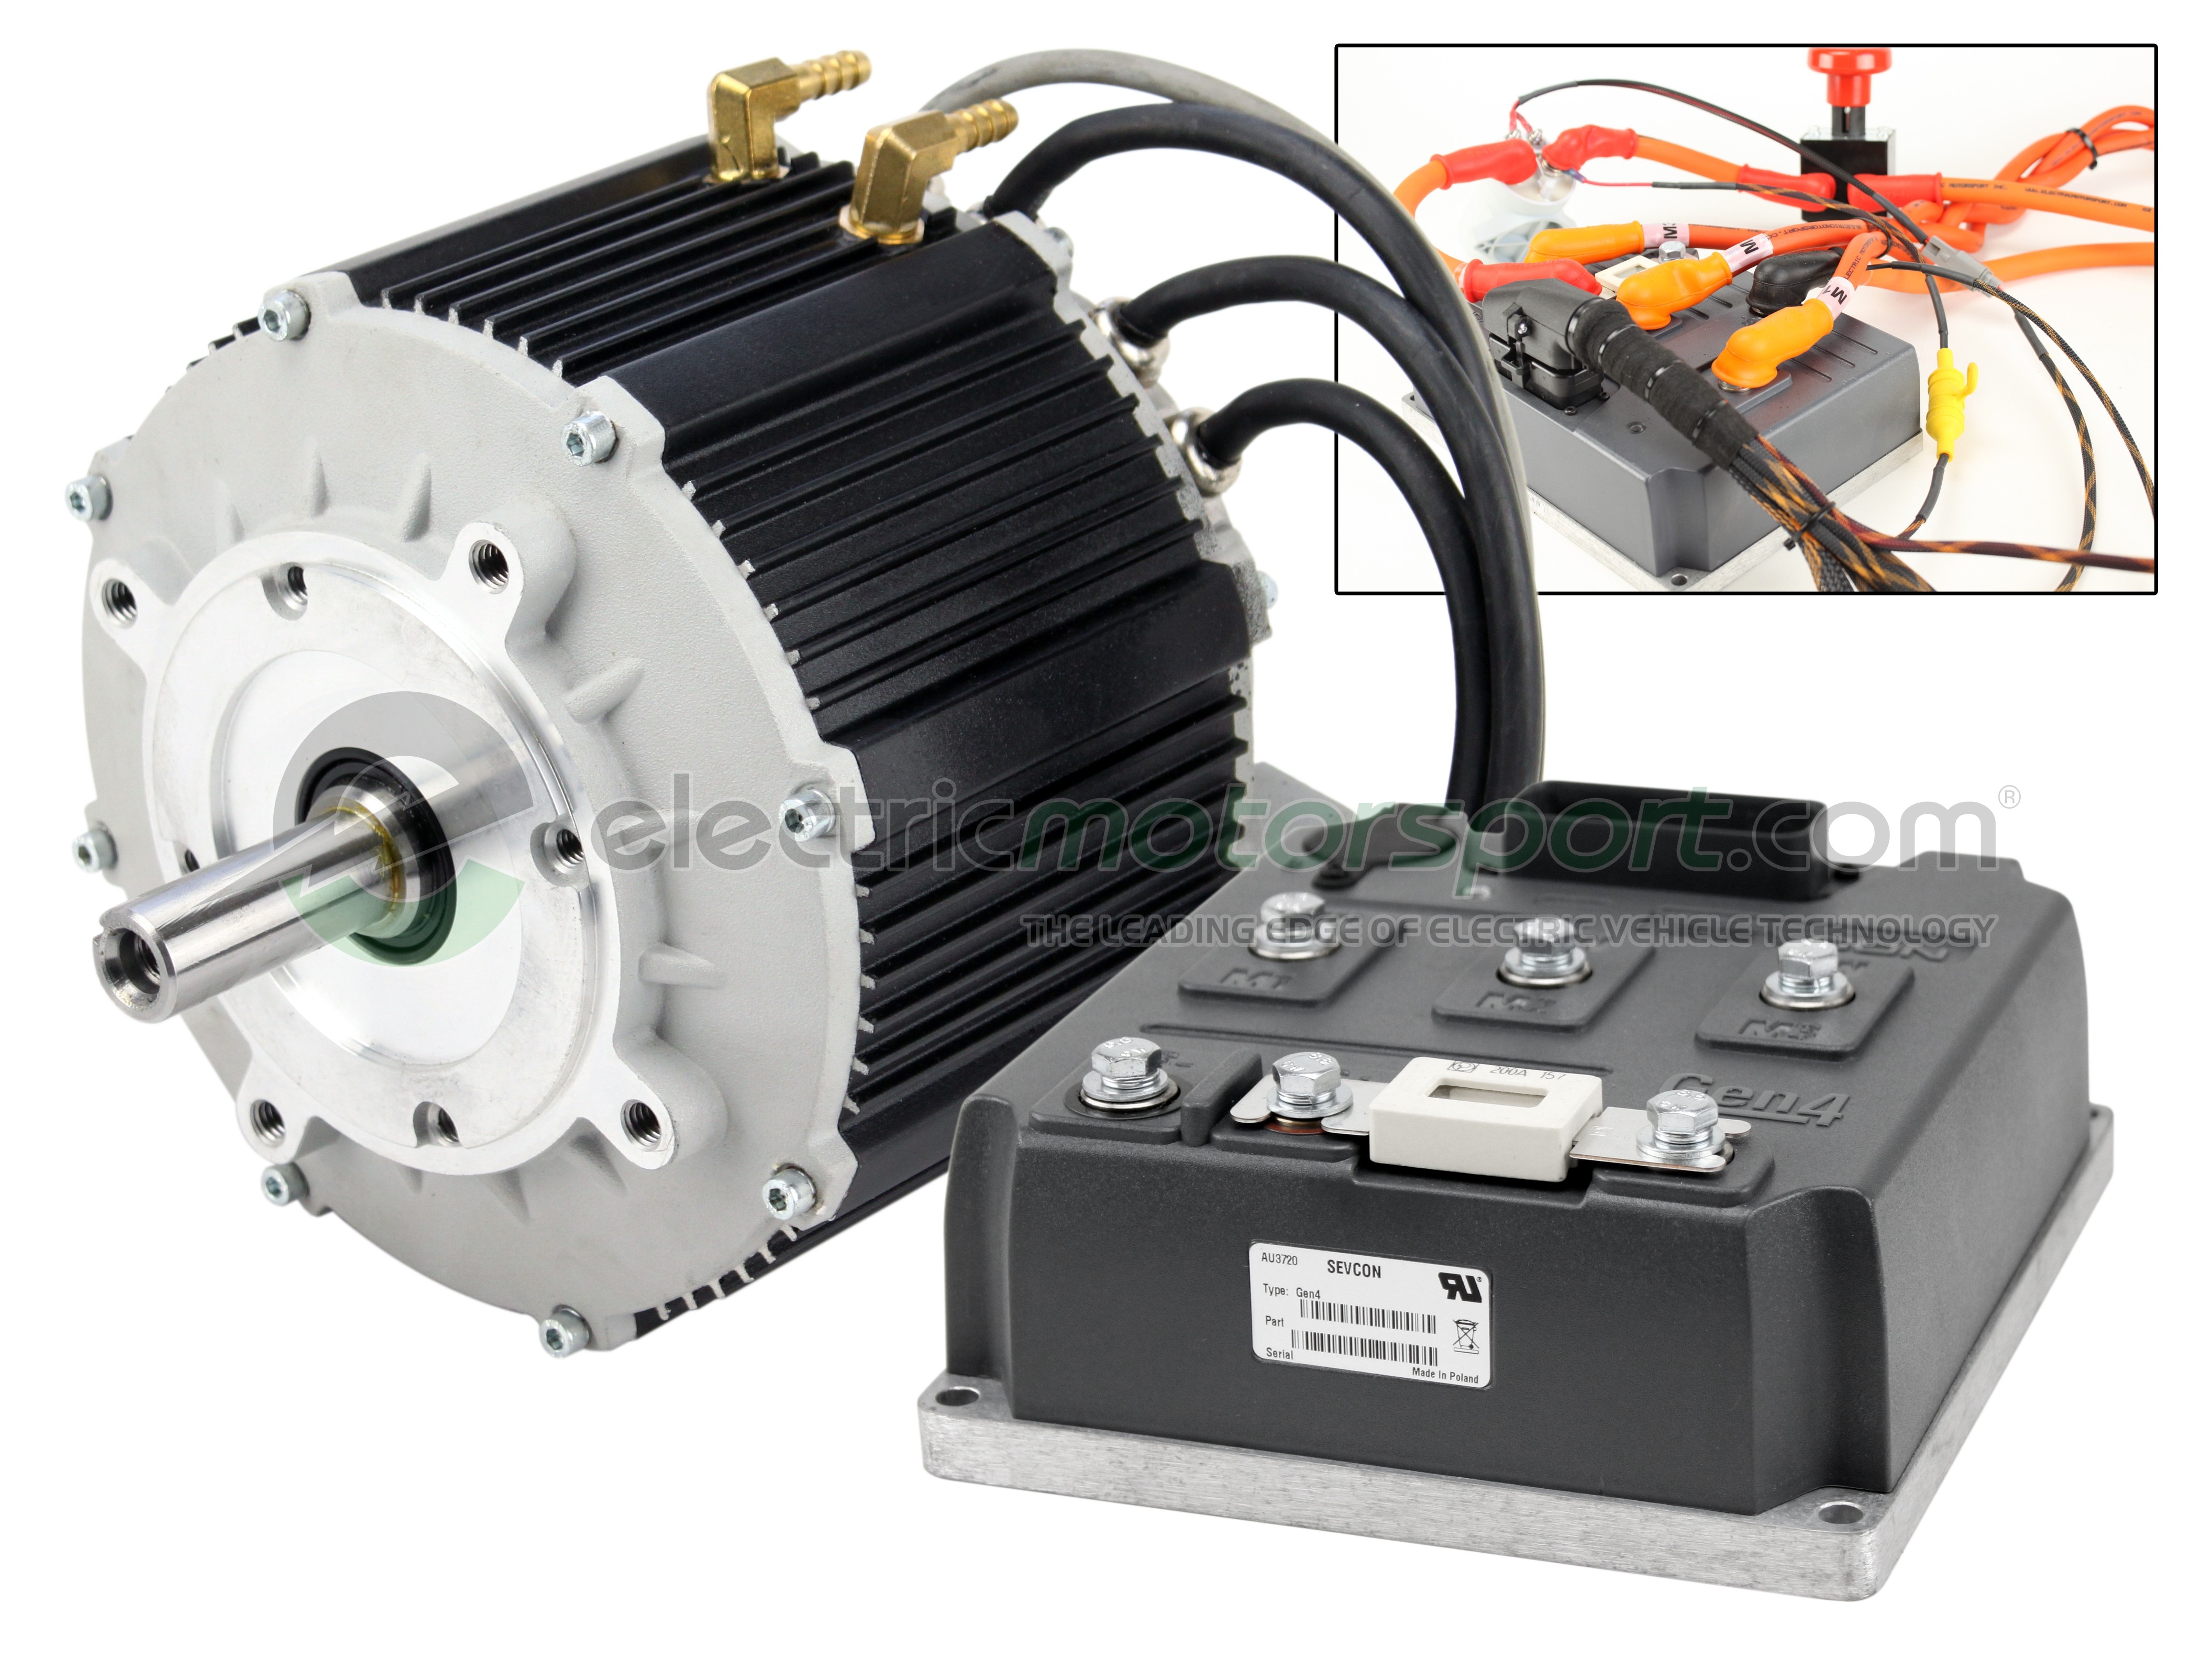 Motor Drive Systems